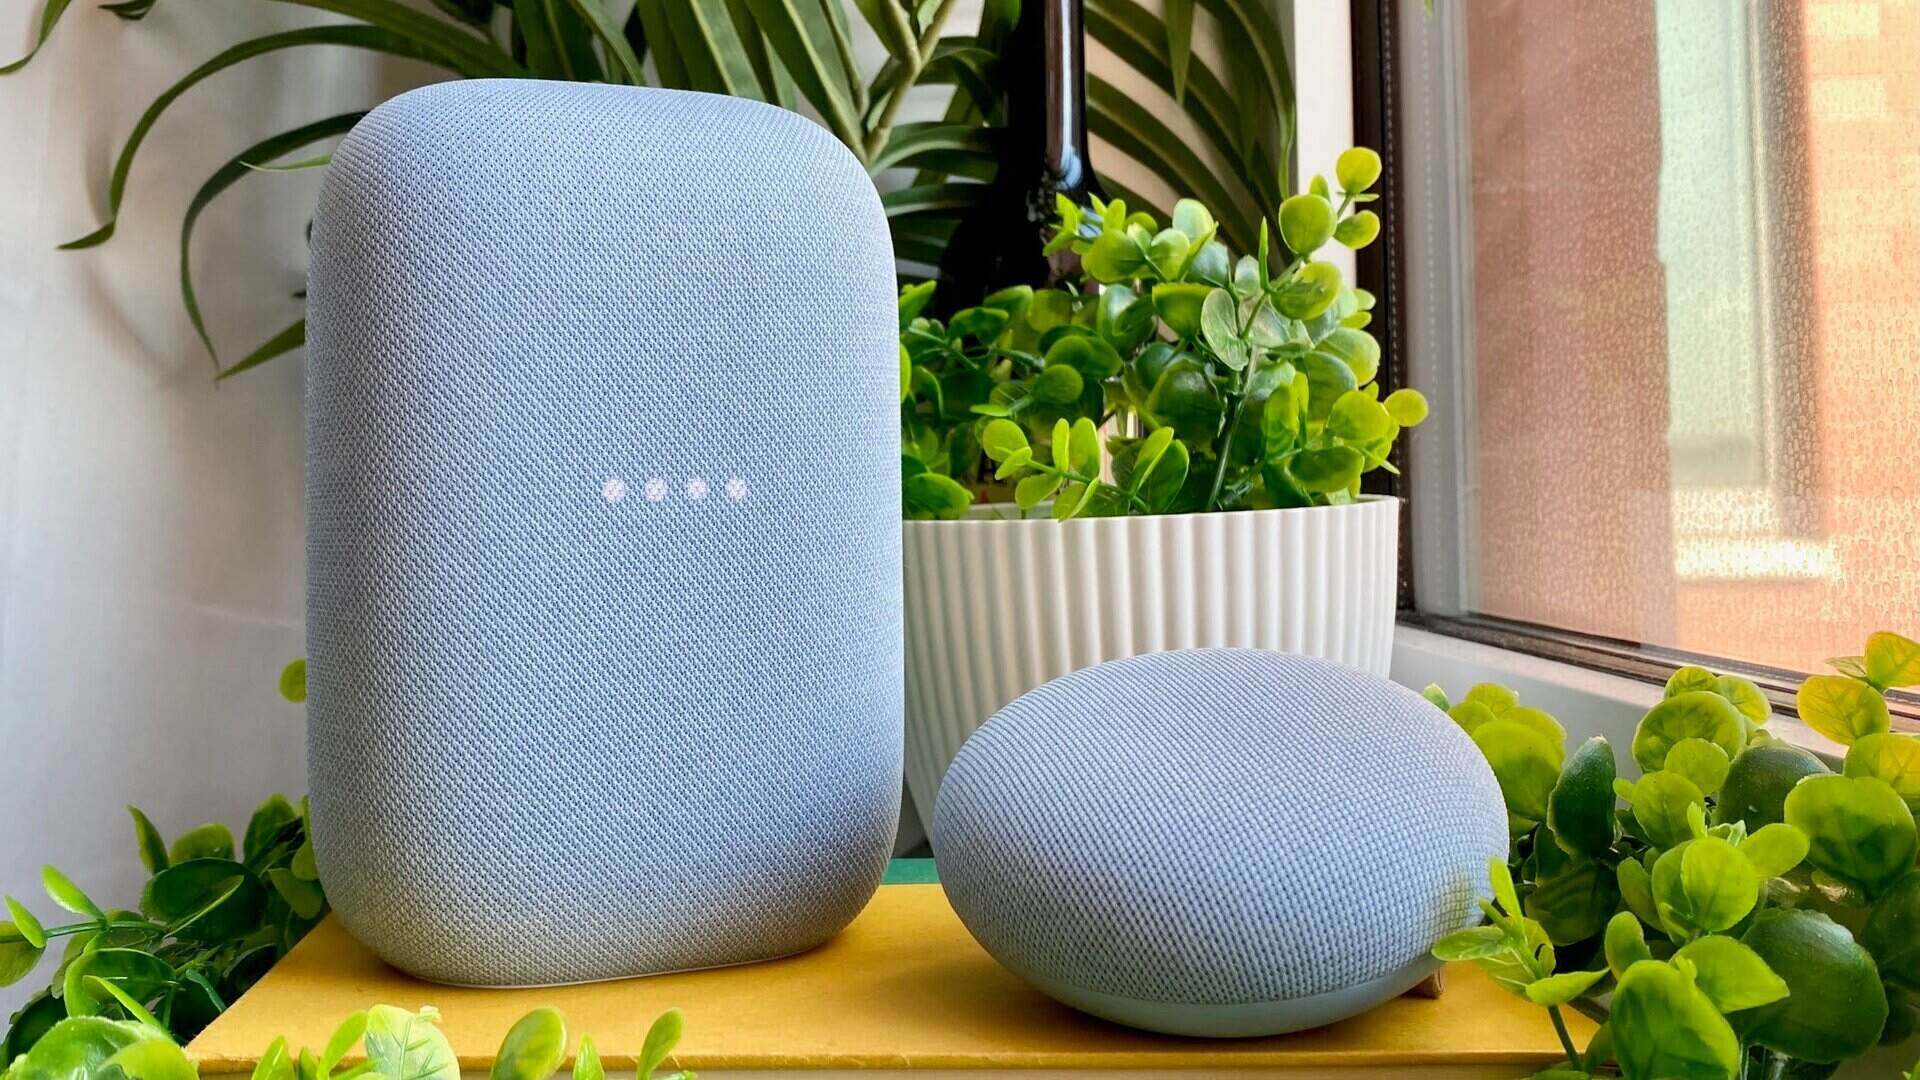 What Is Google Home For